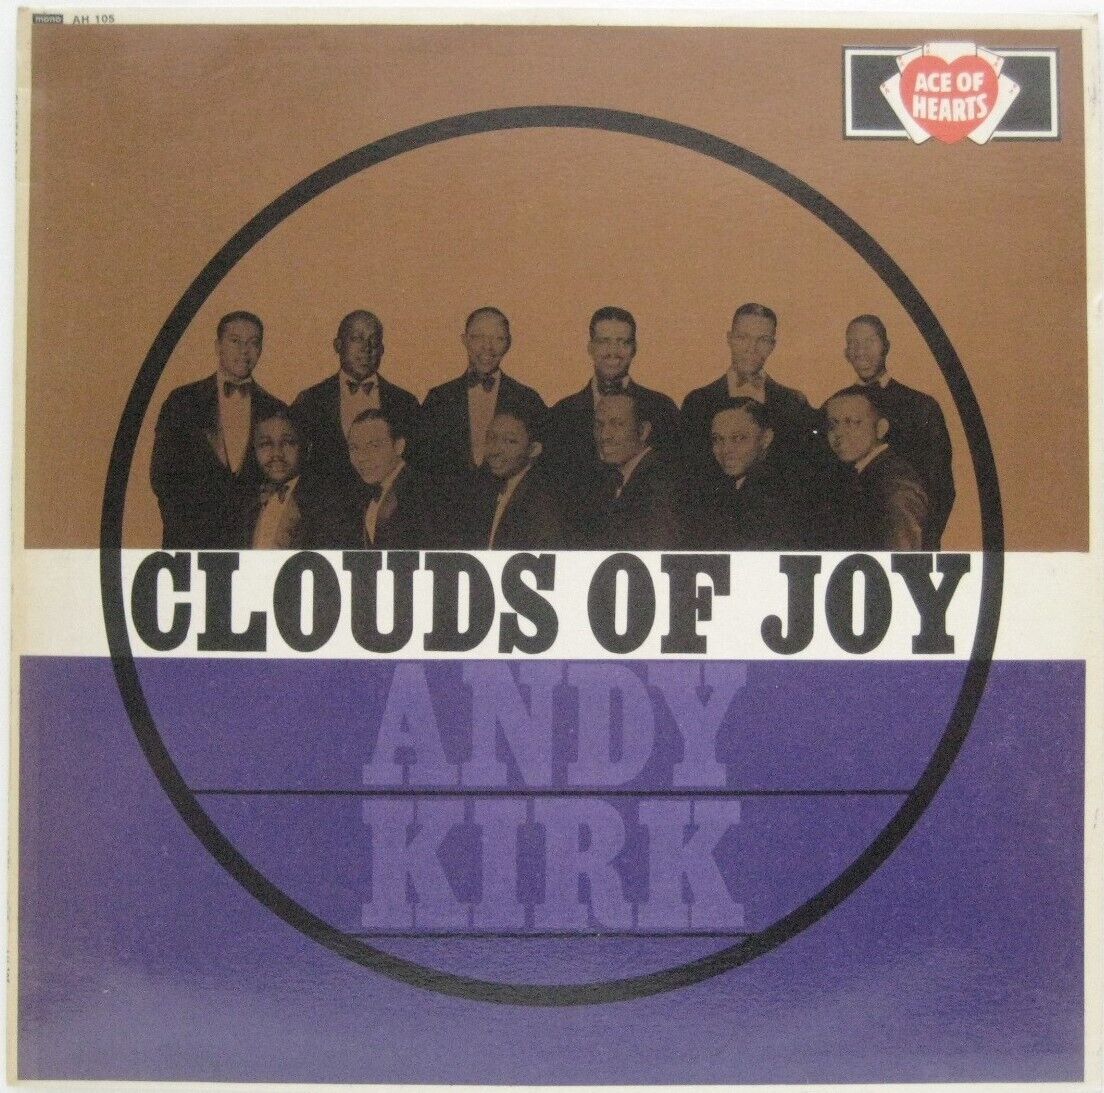 Ace of Hearts ANDY KIRK CLOUDS OF JOY Vinyl 33 RPM 12